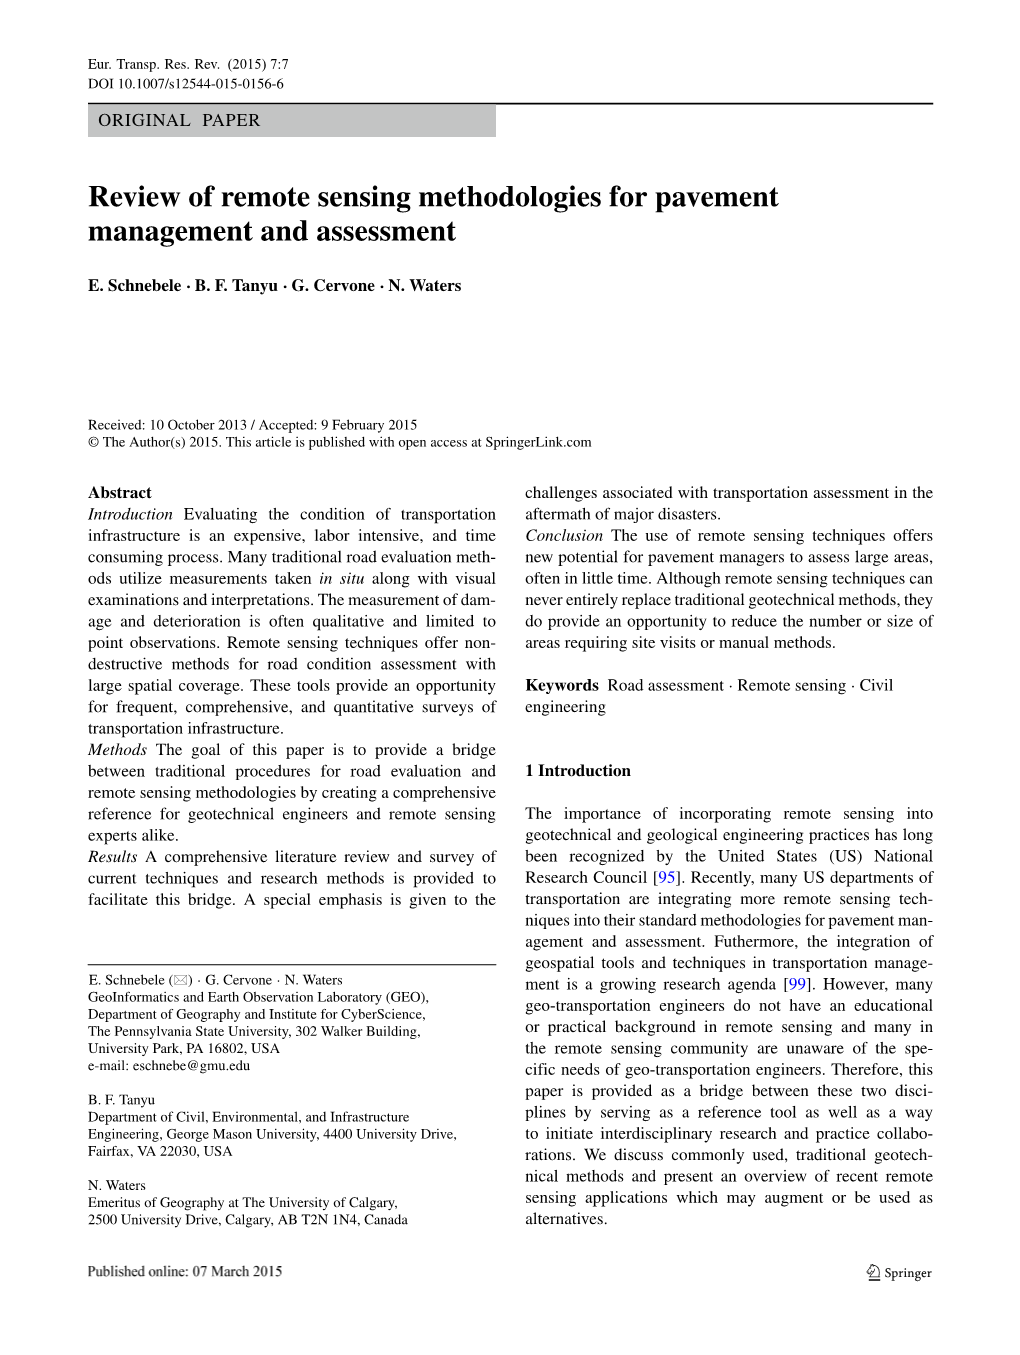 Review of Remote Sensing Methodologies for Pavement Management and Assessment